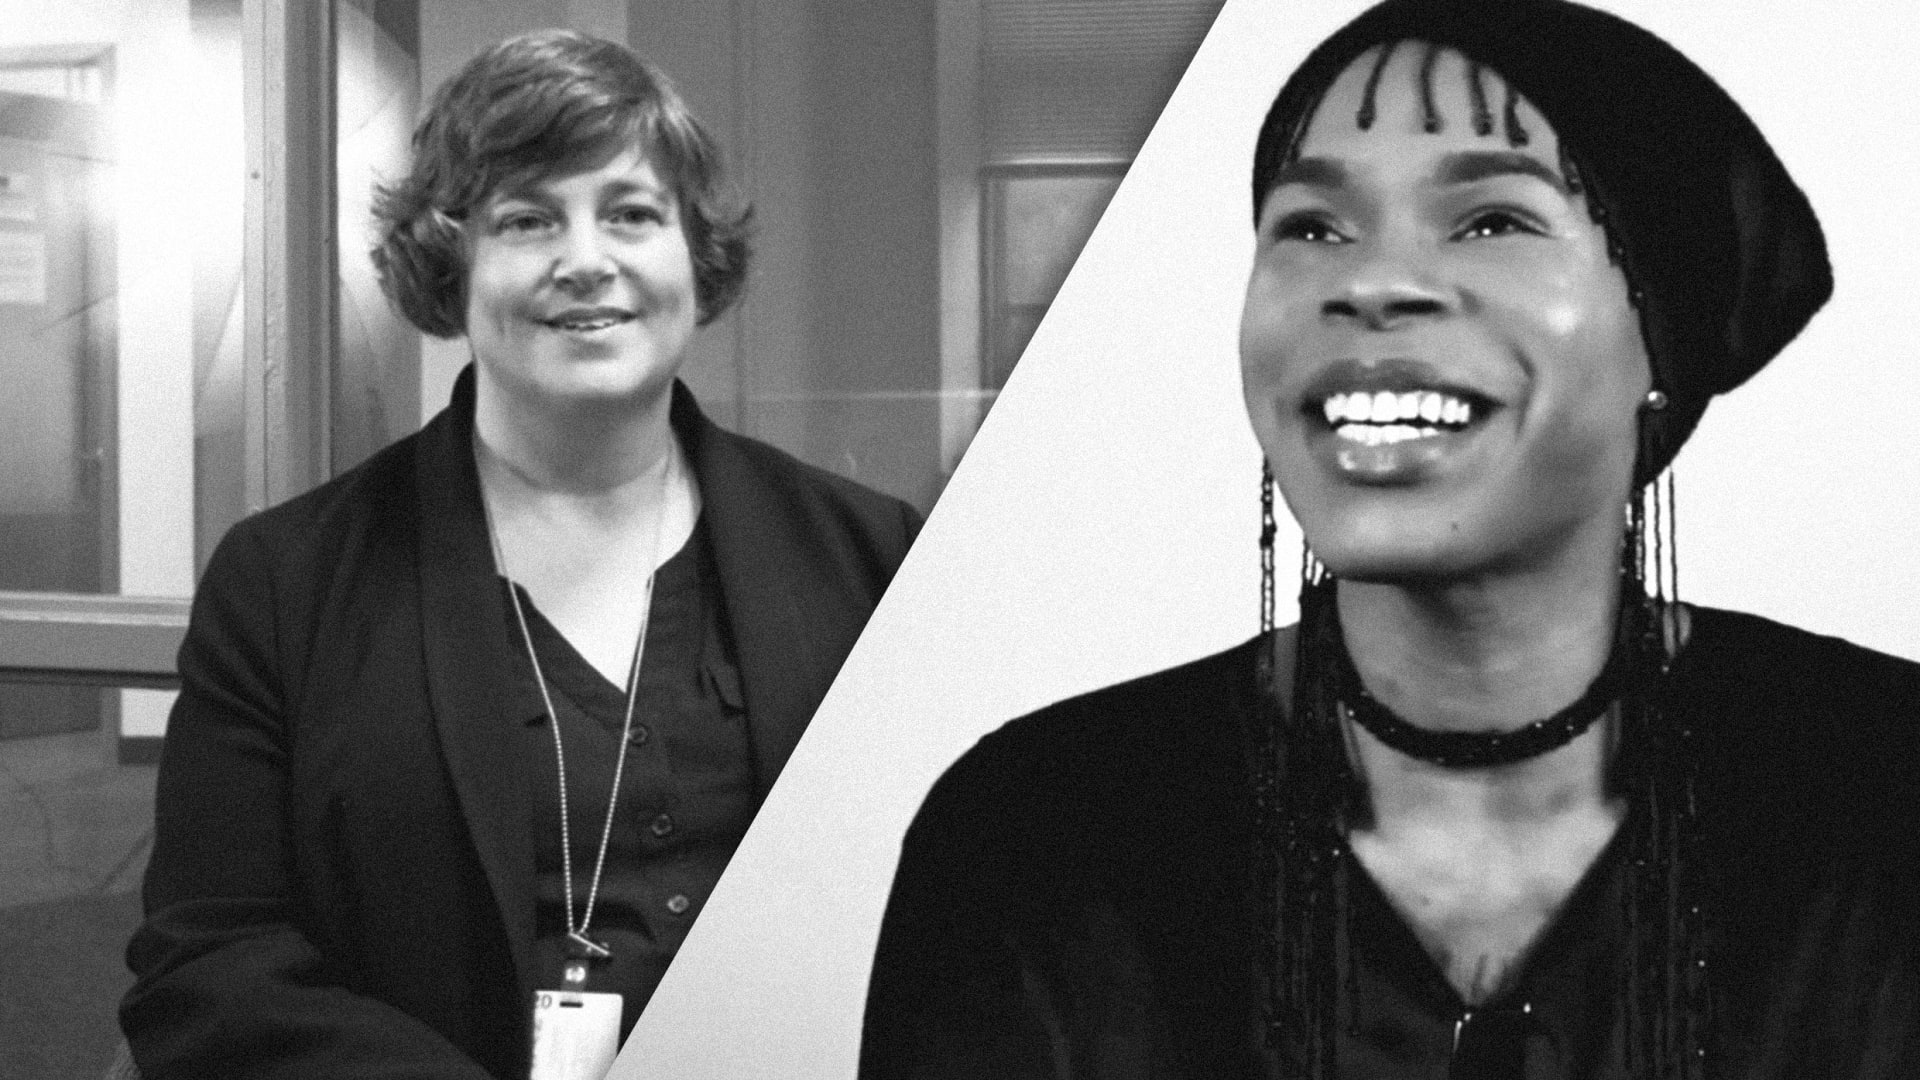 These powerful videos use people’s stories of coming out to help support the fight for civil rights